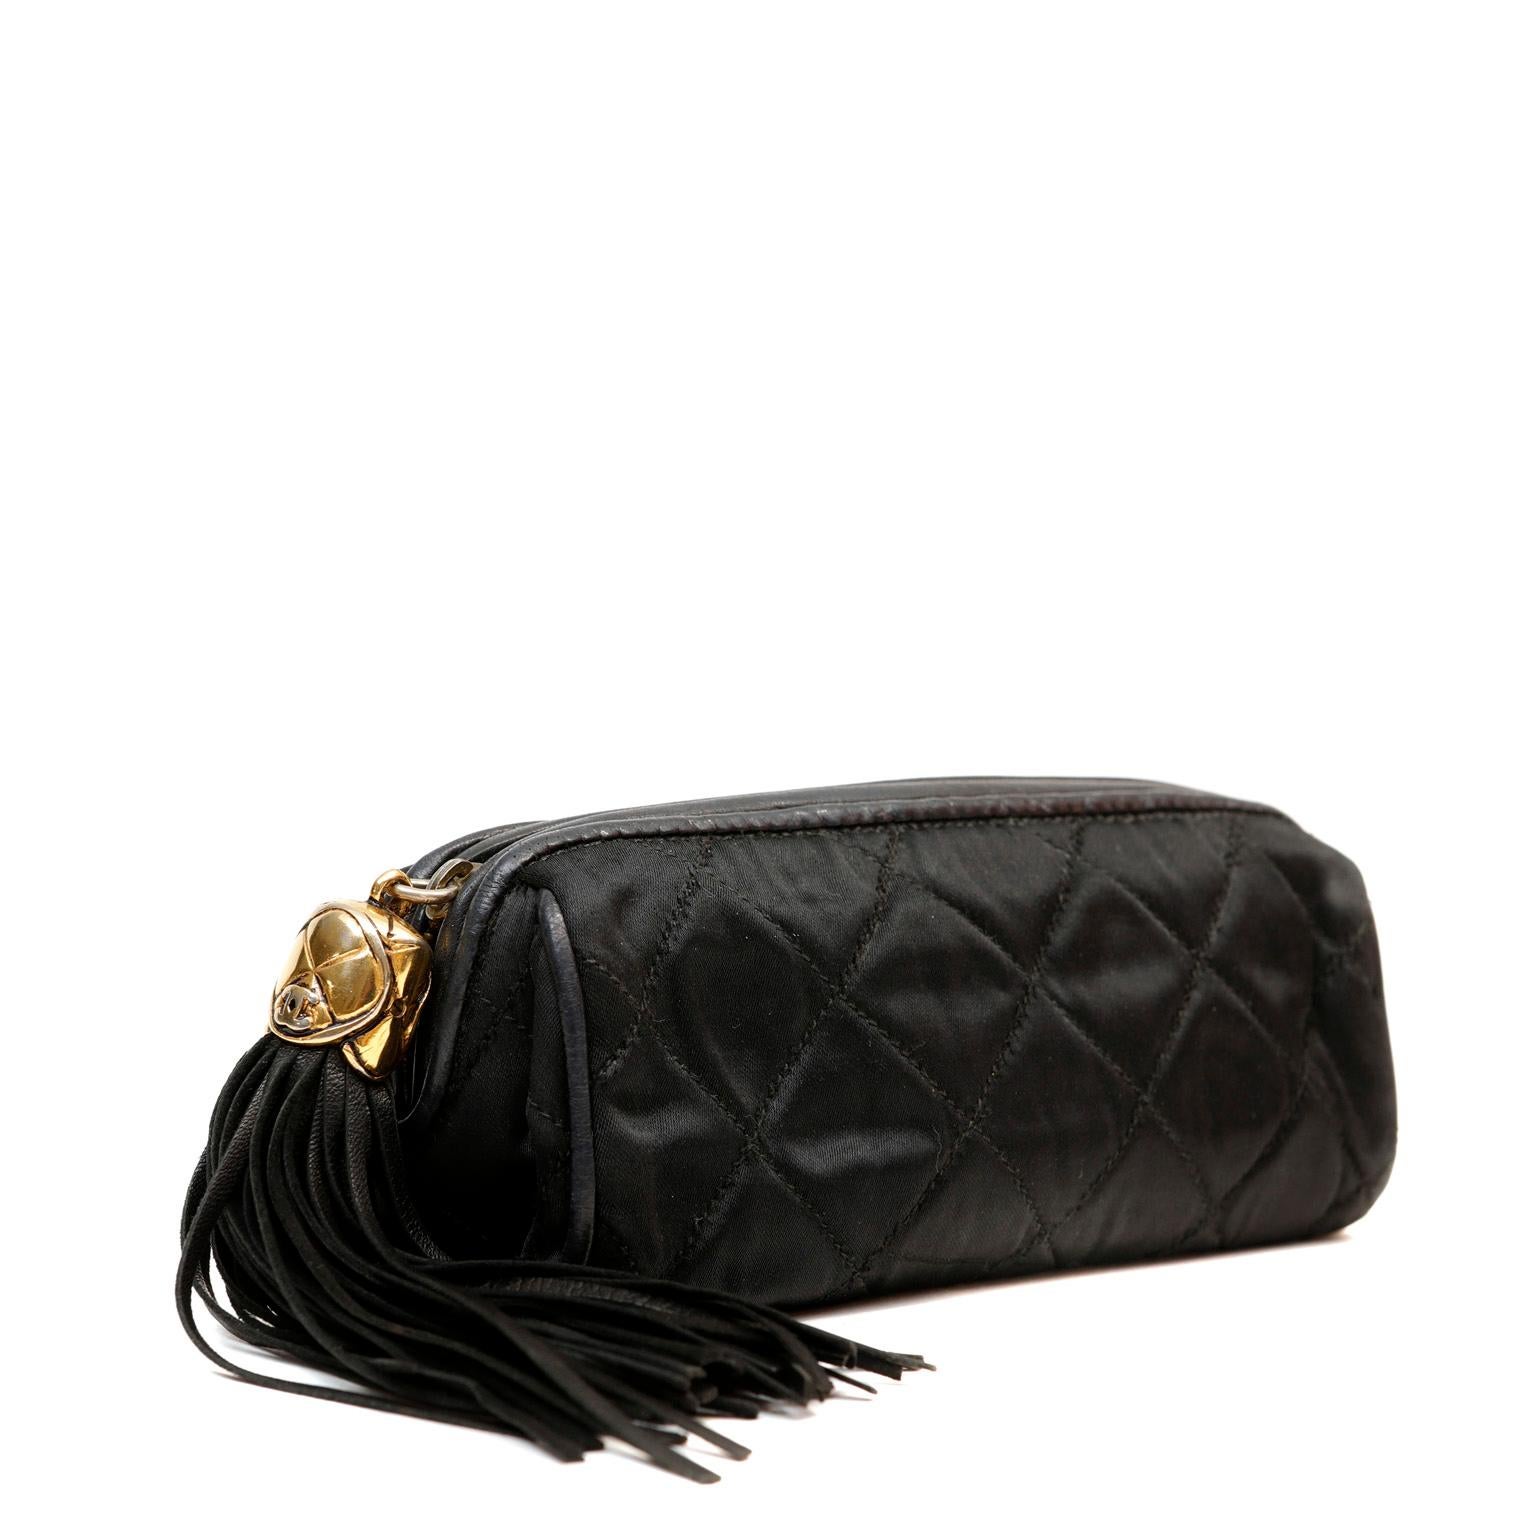 This authentic Chanel Black Satin Tasseled Pouch is in excellent vintage condition.  Beautiful and classic 80’s style cosmetic pouch in quilted black satin with oversized black leather tassel zipper pull. 

PBF 13246